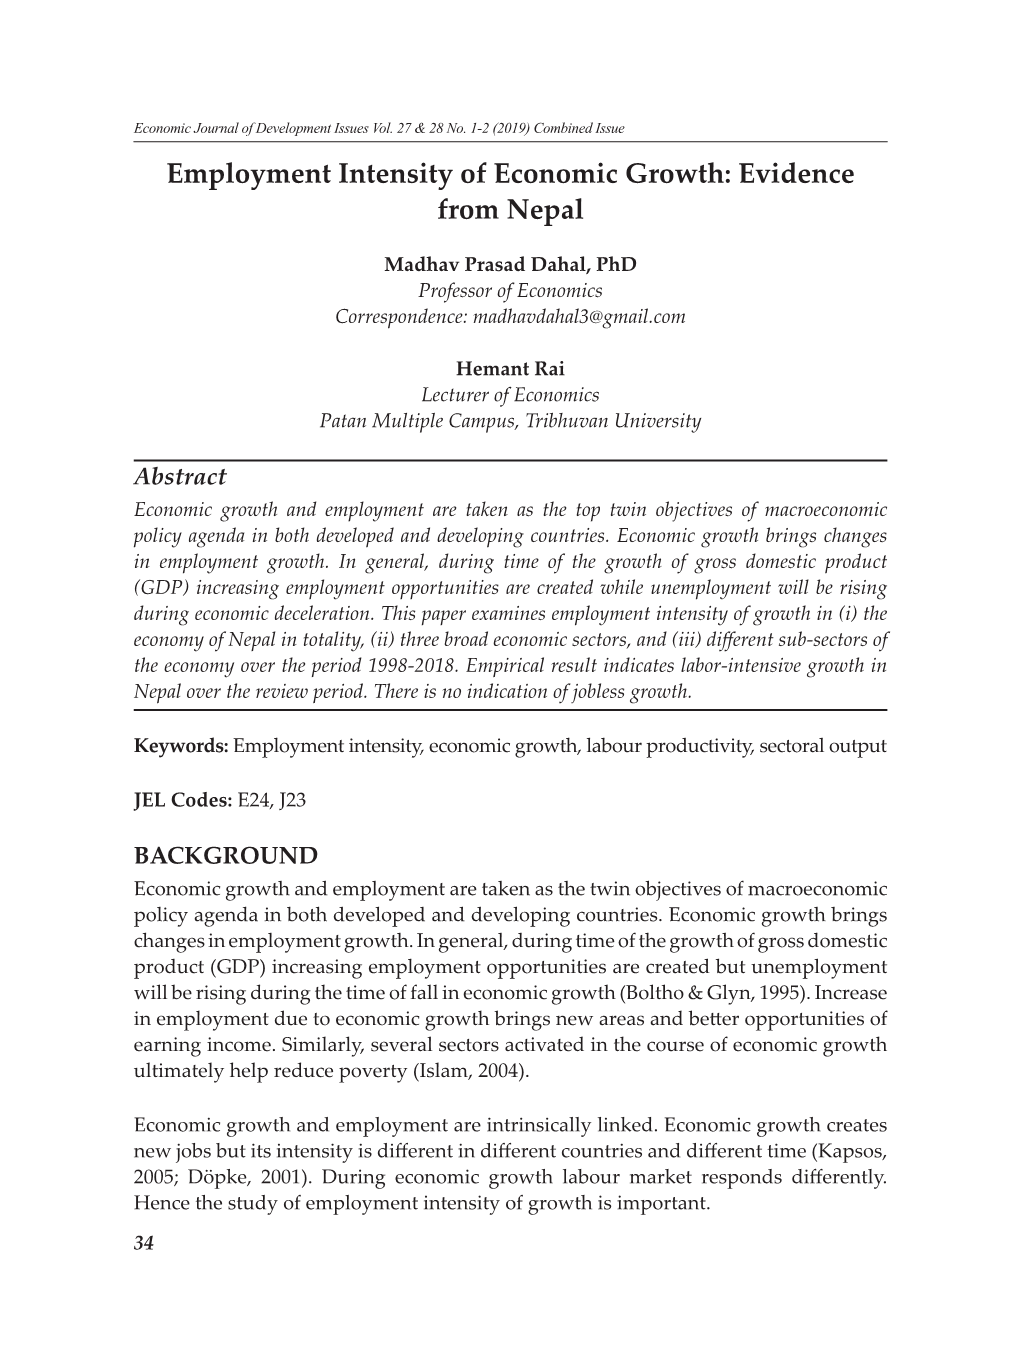 Employment Intensity of Economic Growth: Evidence from Nepal